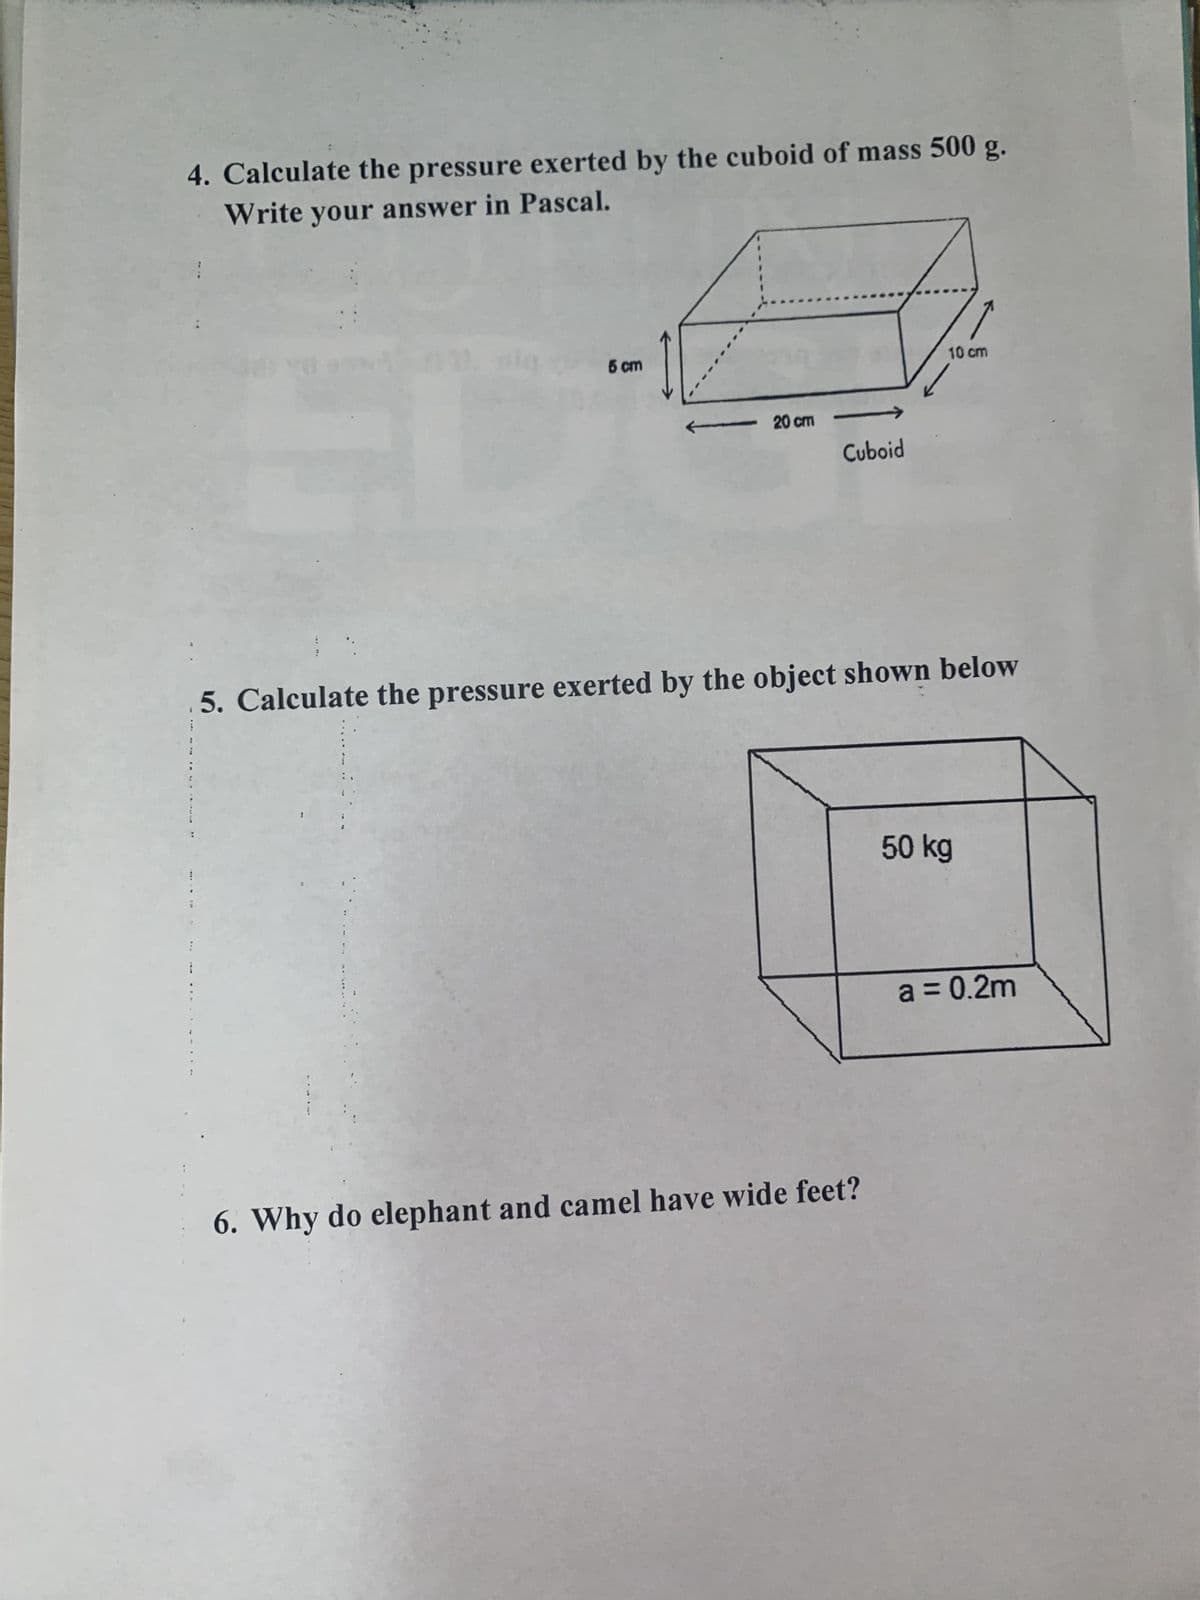 4. Calculate the pressure exerted by the cuboid of mass 500 g.
Write your answer in Pascal.
ED
5 cm
20 cm
Cuboid
10 cm
5. Calculate the pressure exerted by the object shown below
6. Why do elephant and camel have wide feet?
50 kg
a = 0.2m